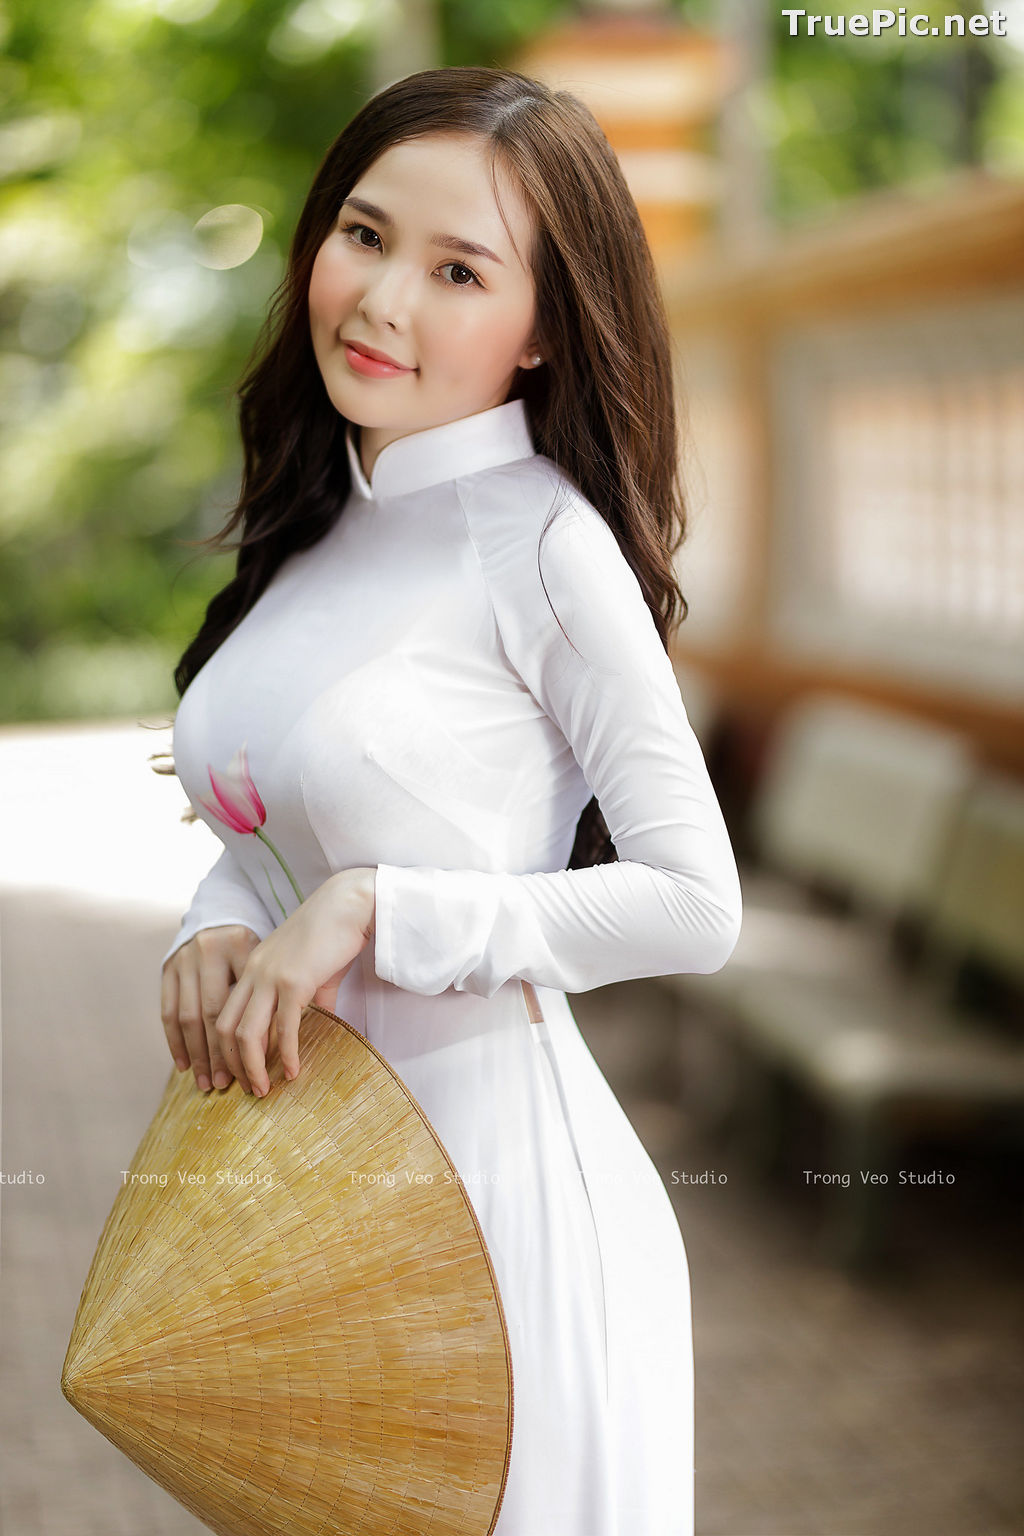 Image The Beauty of Vietnamese Girls with Traditional Dress (Ao Dai) #1 - TruePic.net - Picture-41